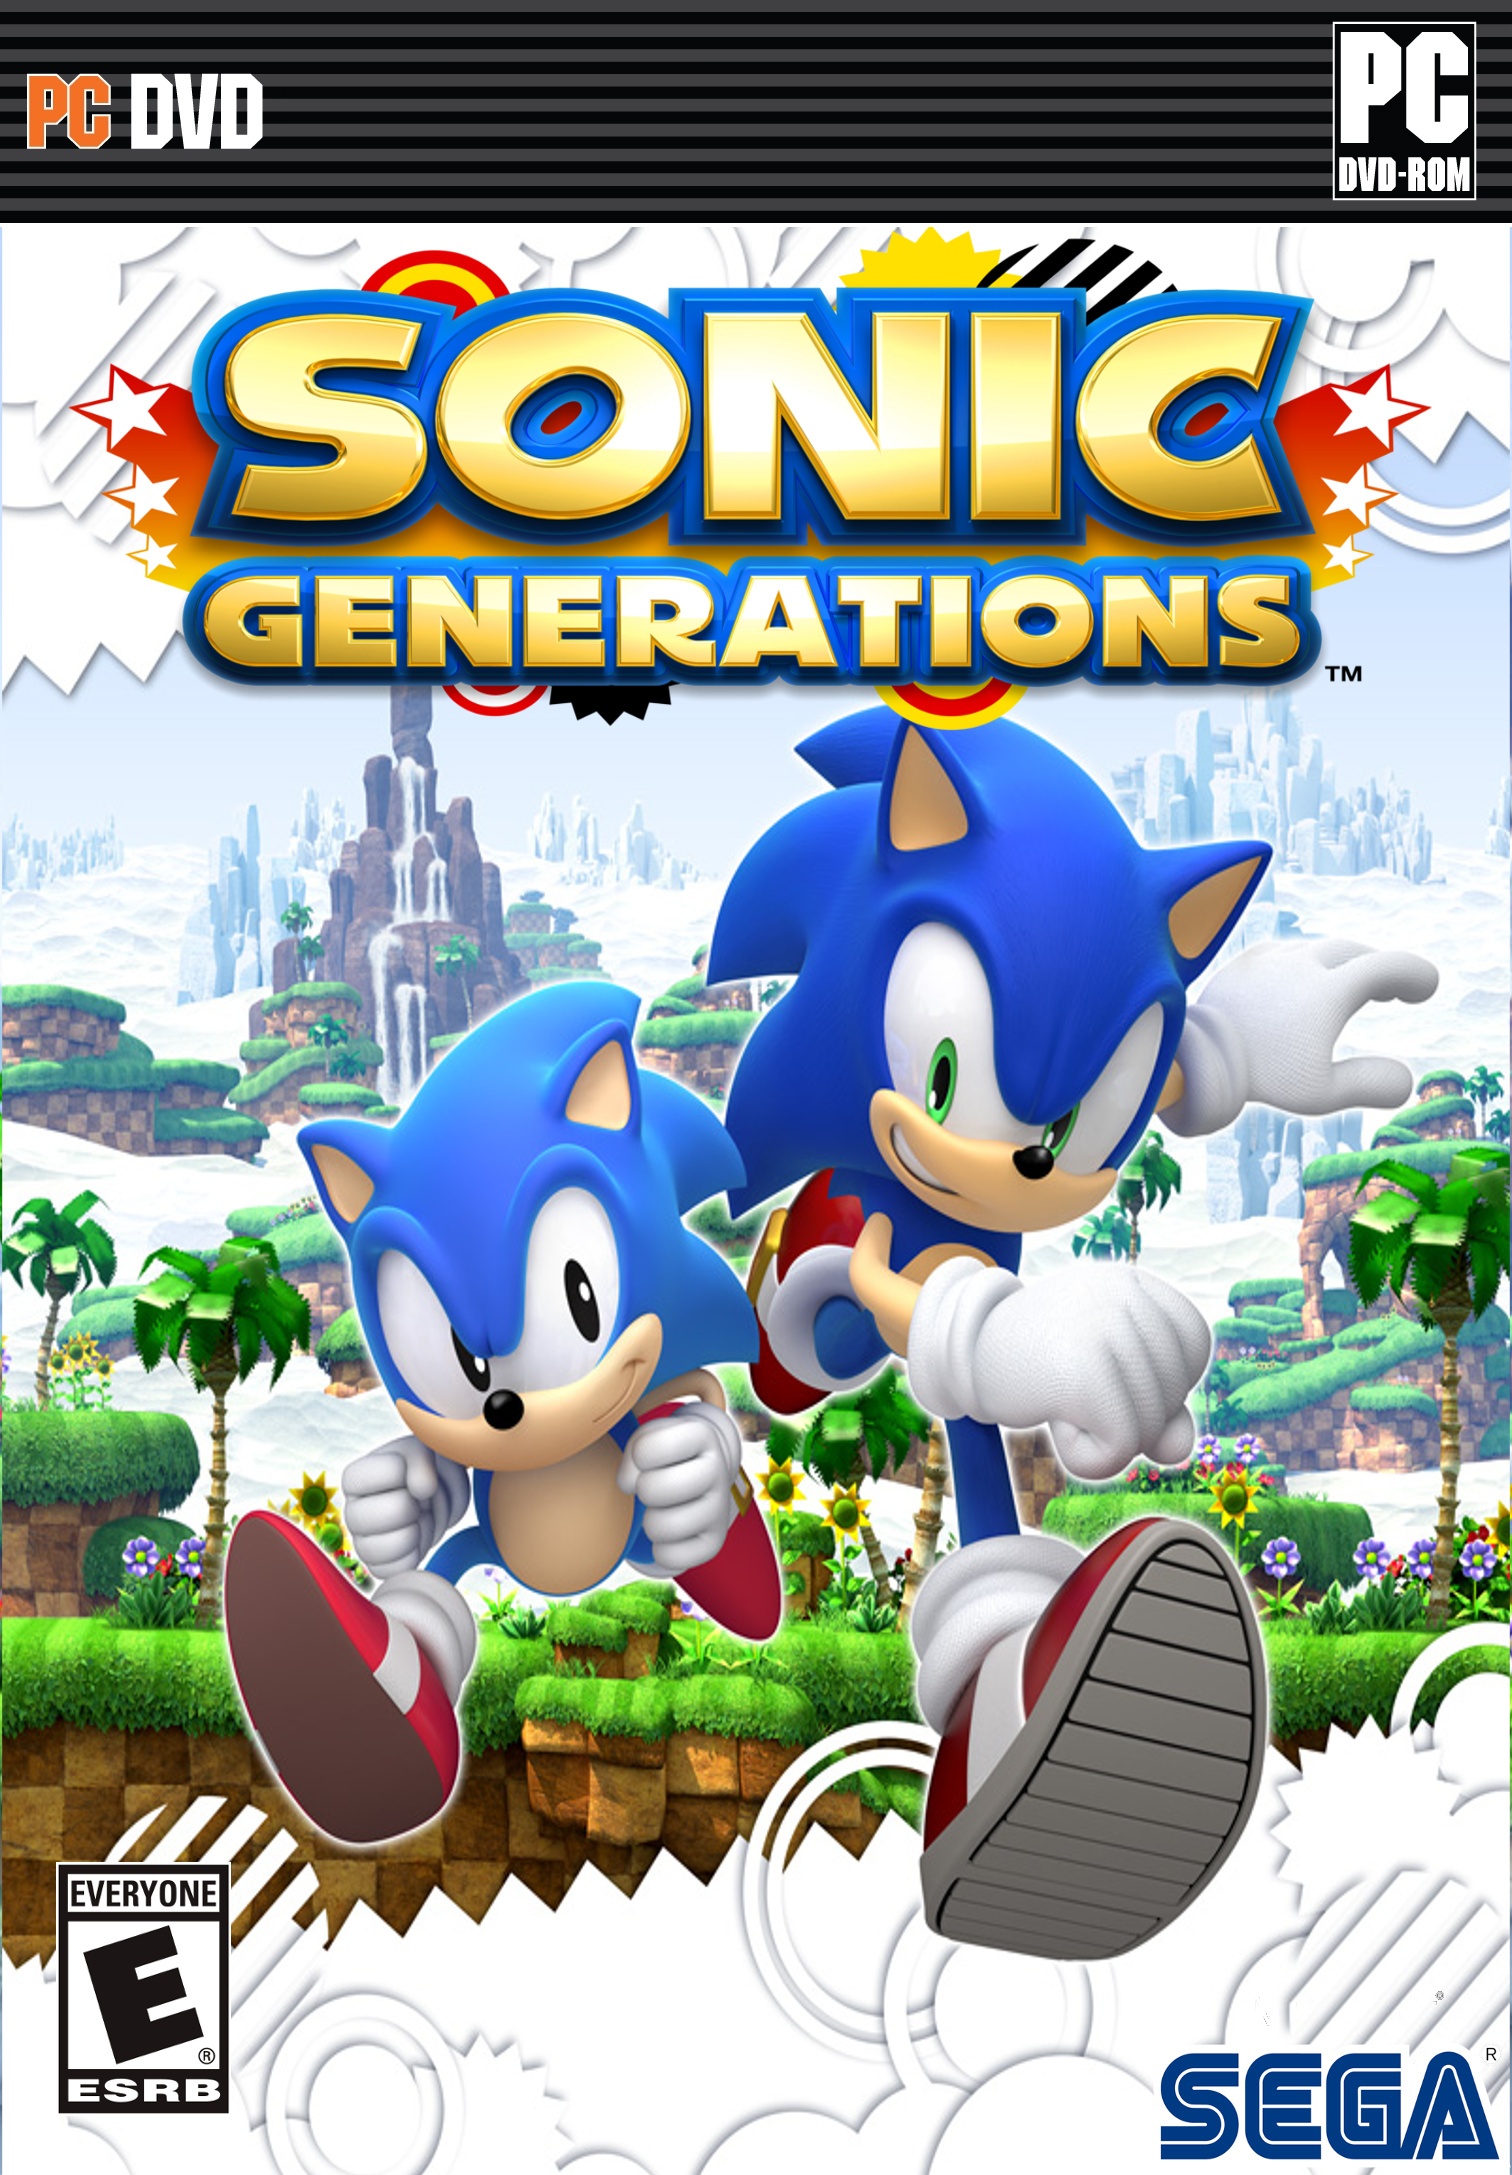 Sonic Generations for the PC box cover